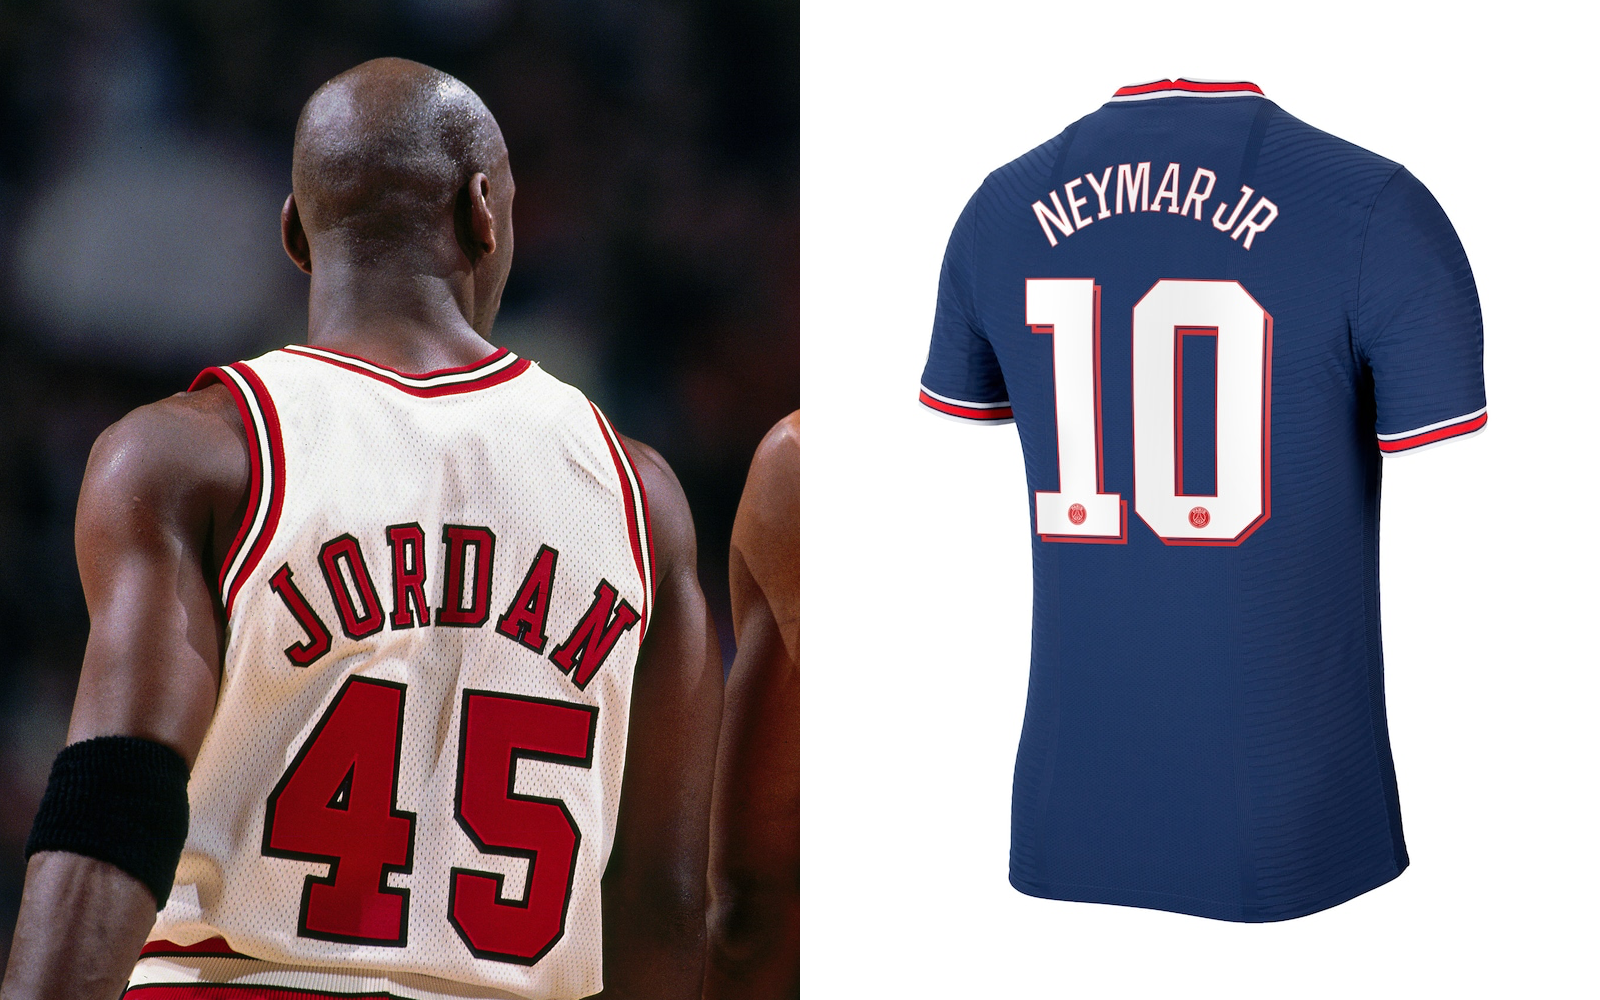 The new PSG font is also inspired by Michael Jordan's Chicago Bulls